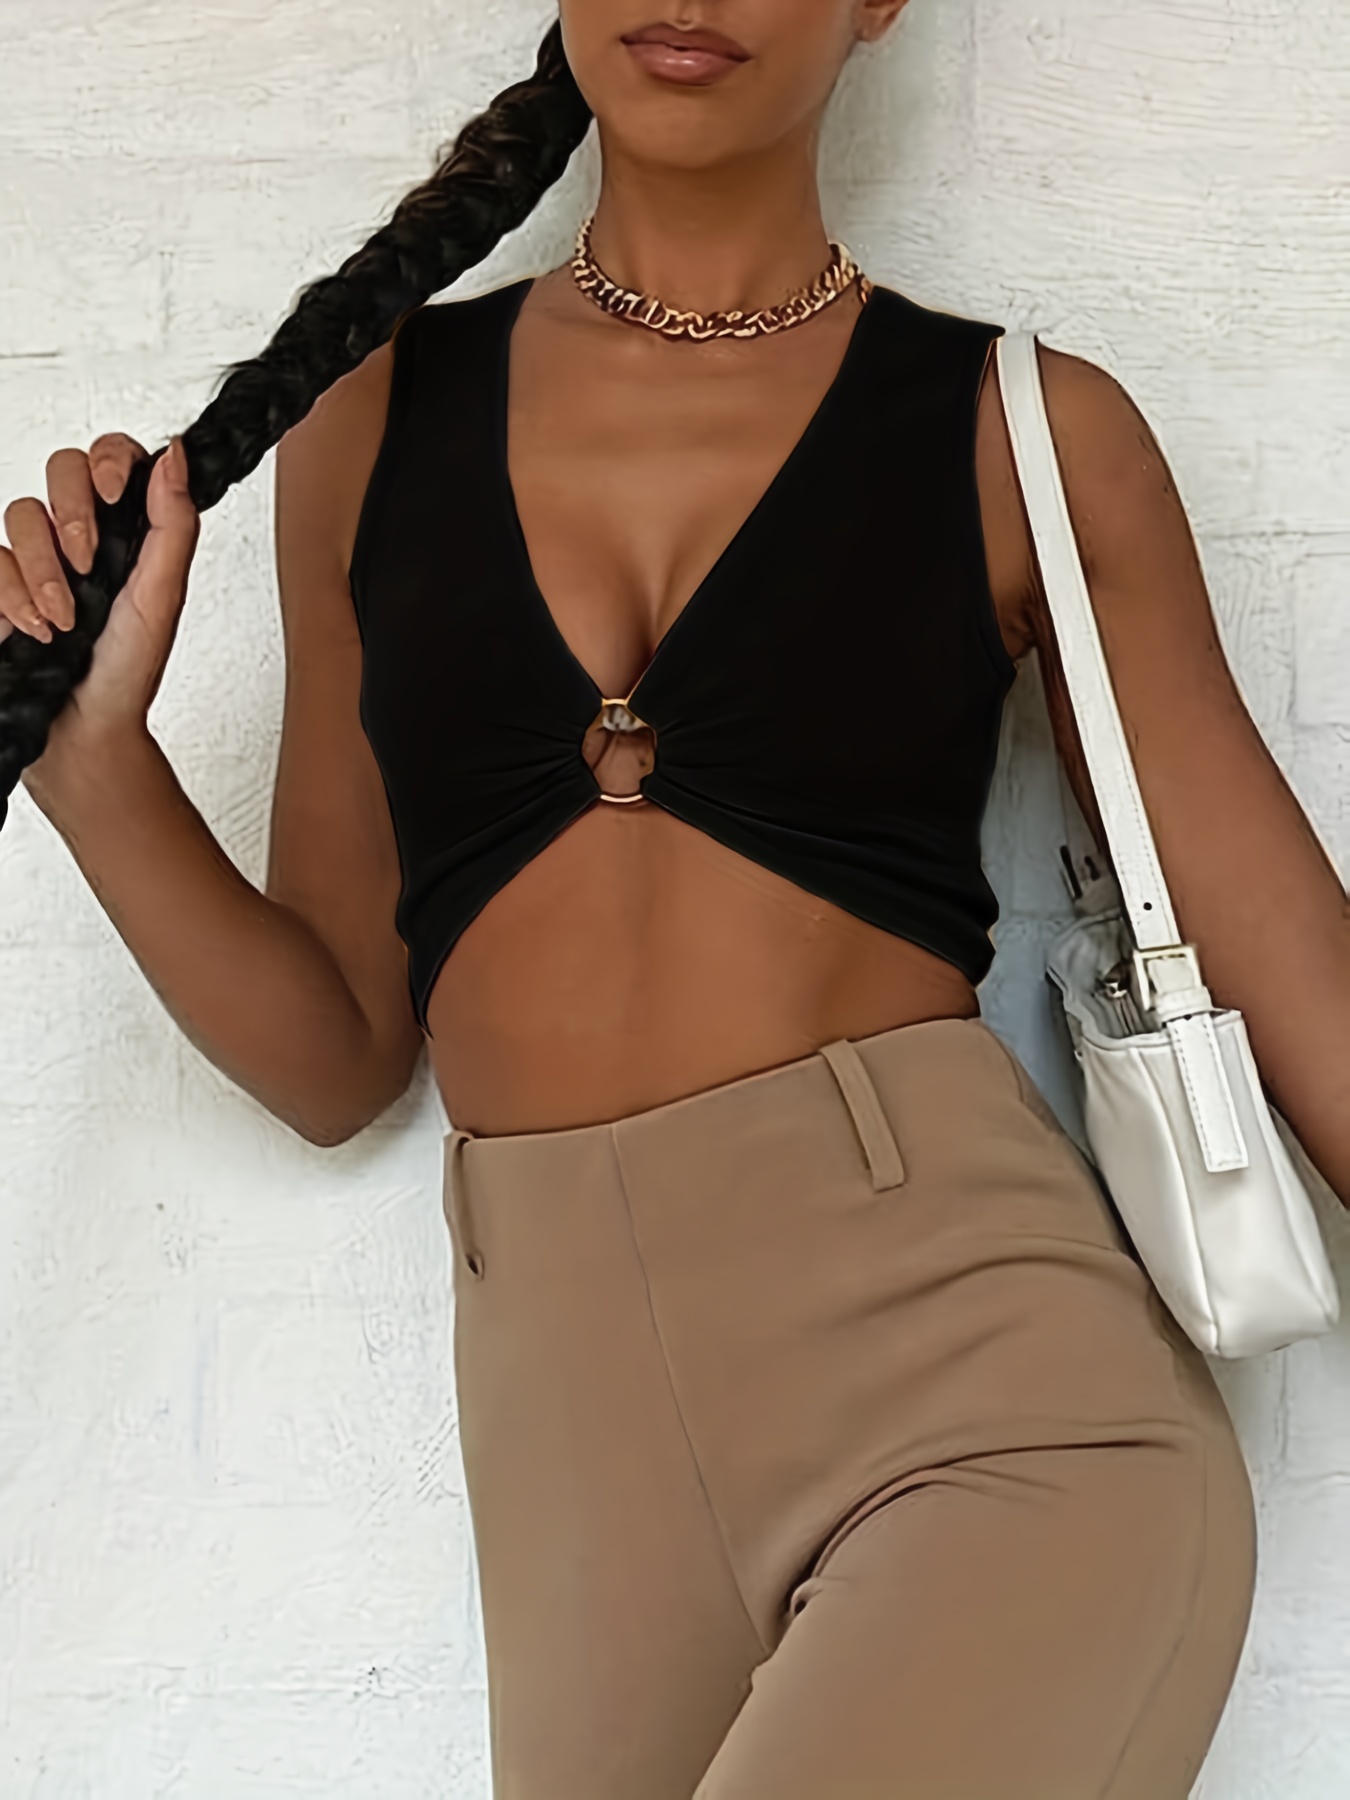 Strap Crop Top with Ring in Neckline